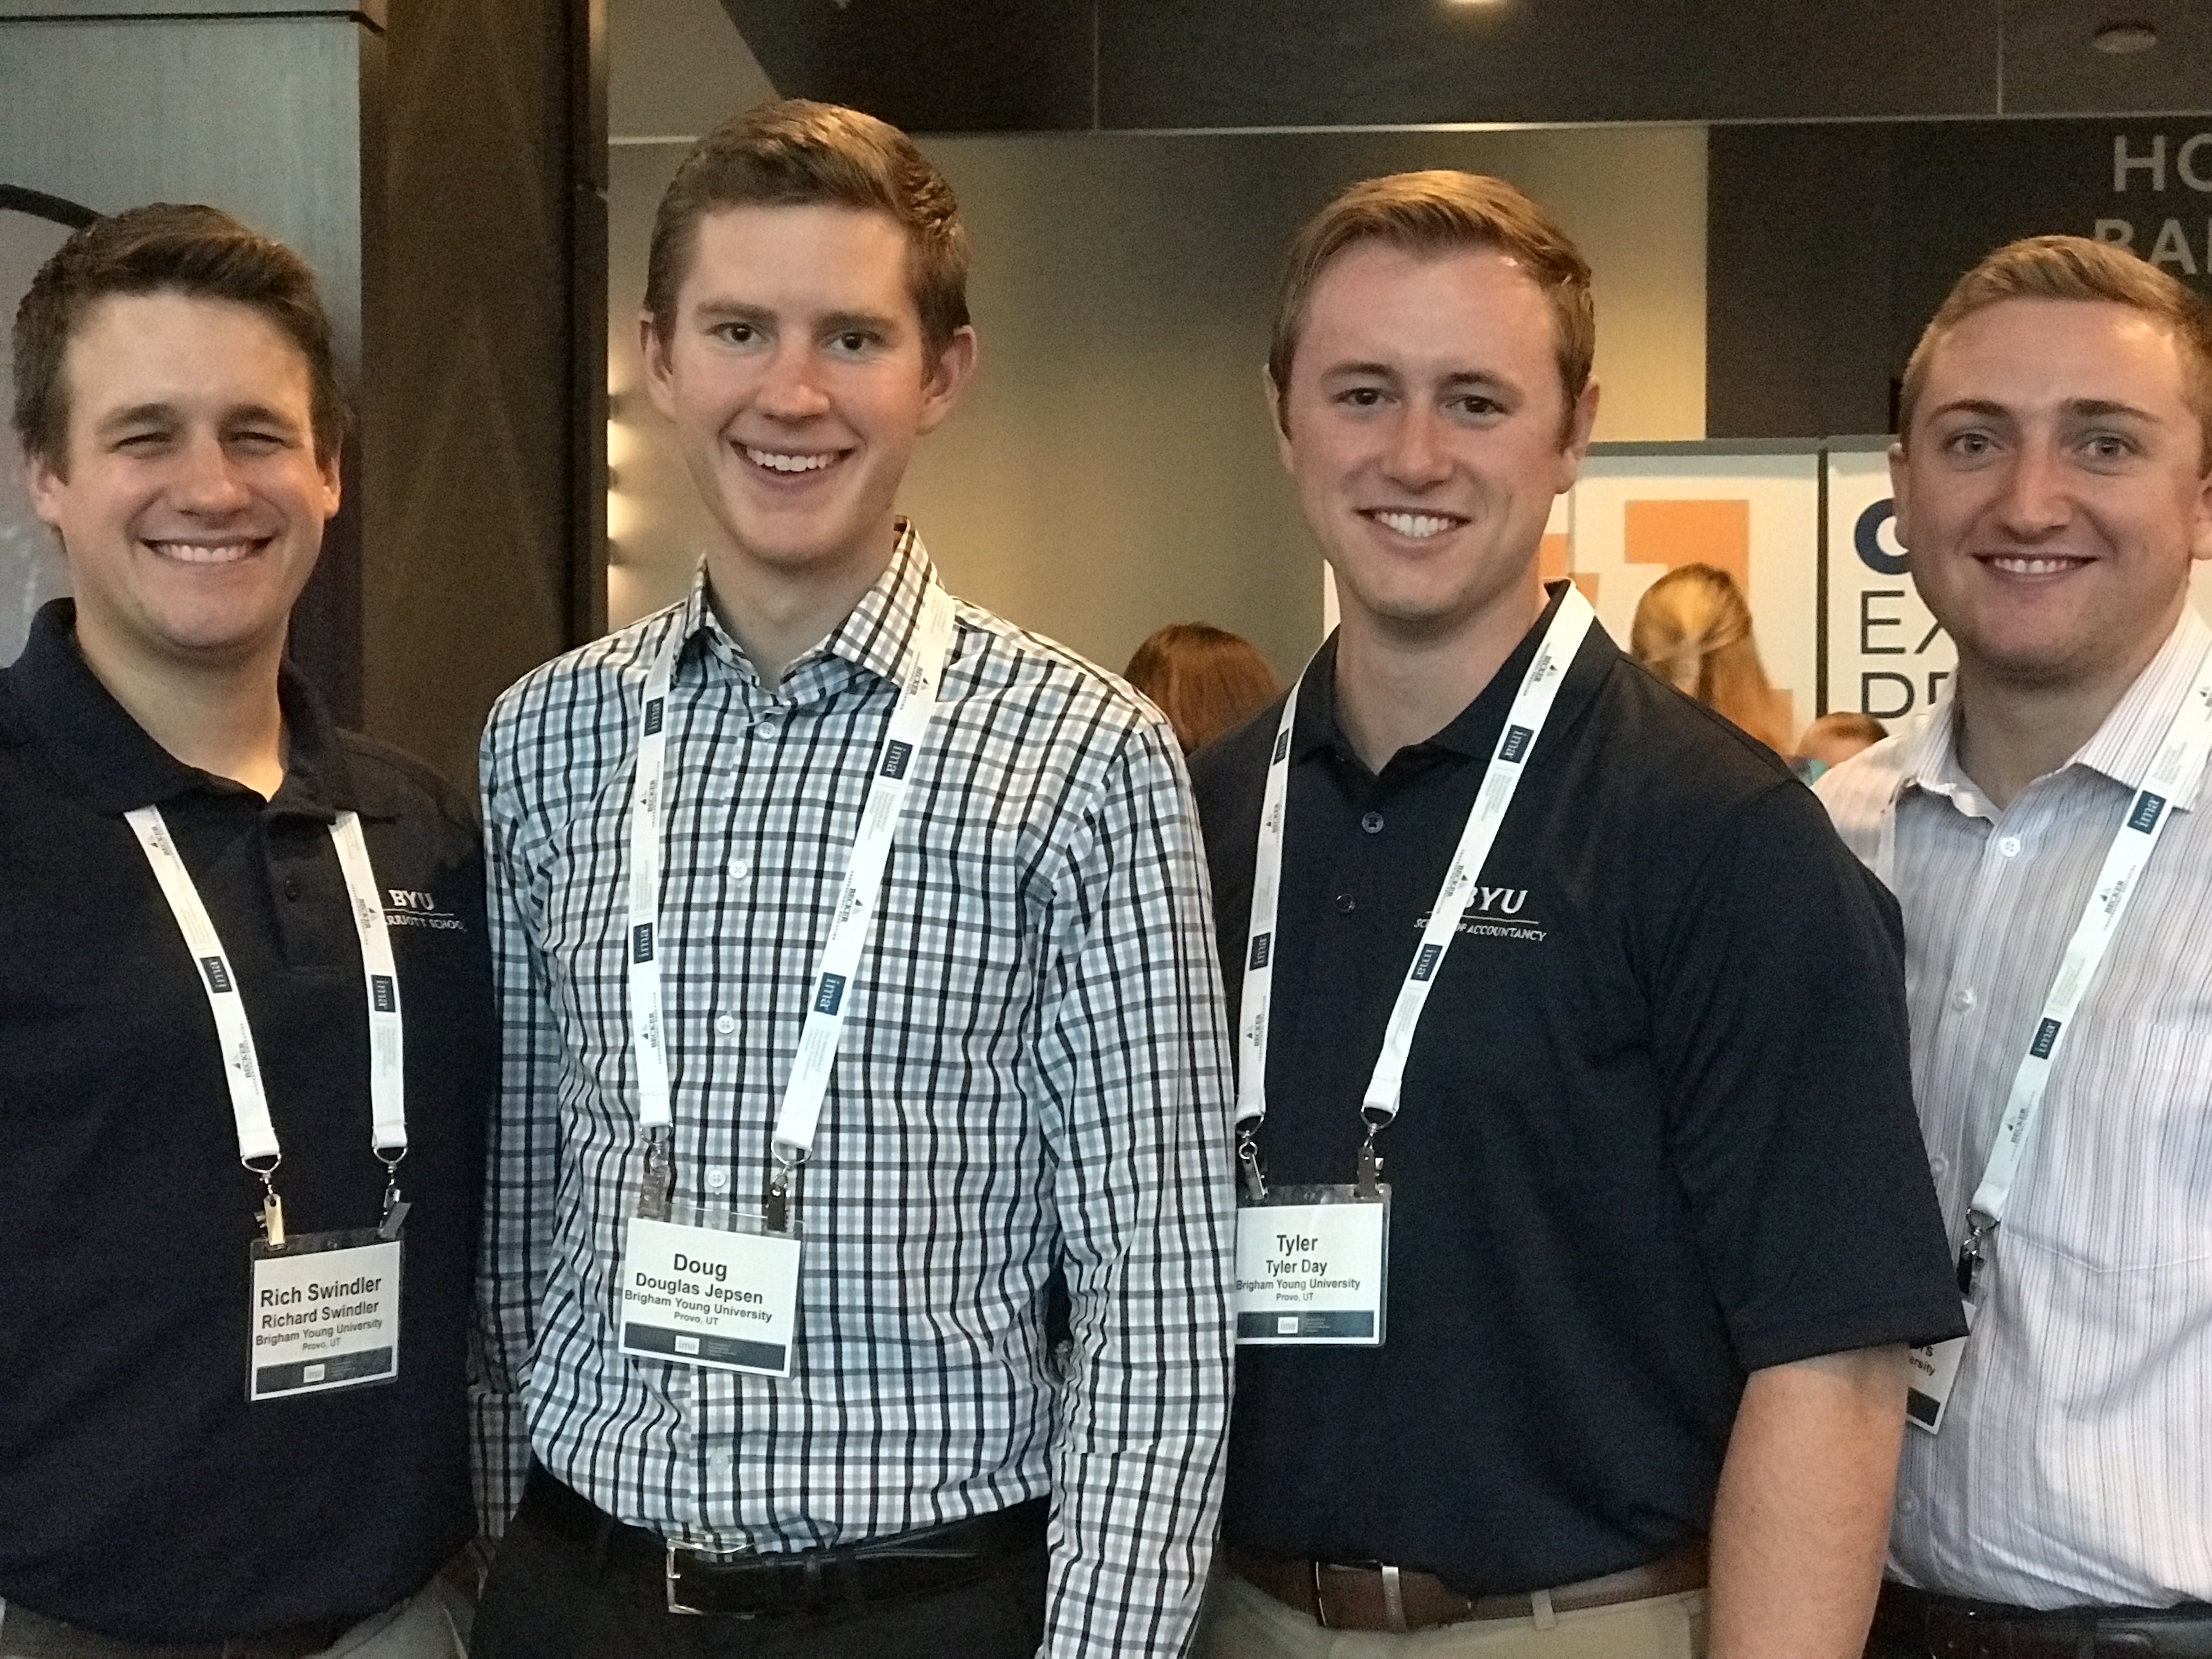 From left: Rich Swindler, Doug Jepsen (2017 BYU IMA Co-President), Tyler Day, and Brady Chambers (2017 BYU IMA Co-President) lead BYU's IMA student chapter and help students prepare to take the CMA exam and be successful in their future careers. (provided by BYU's IMA student chapter)